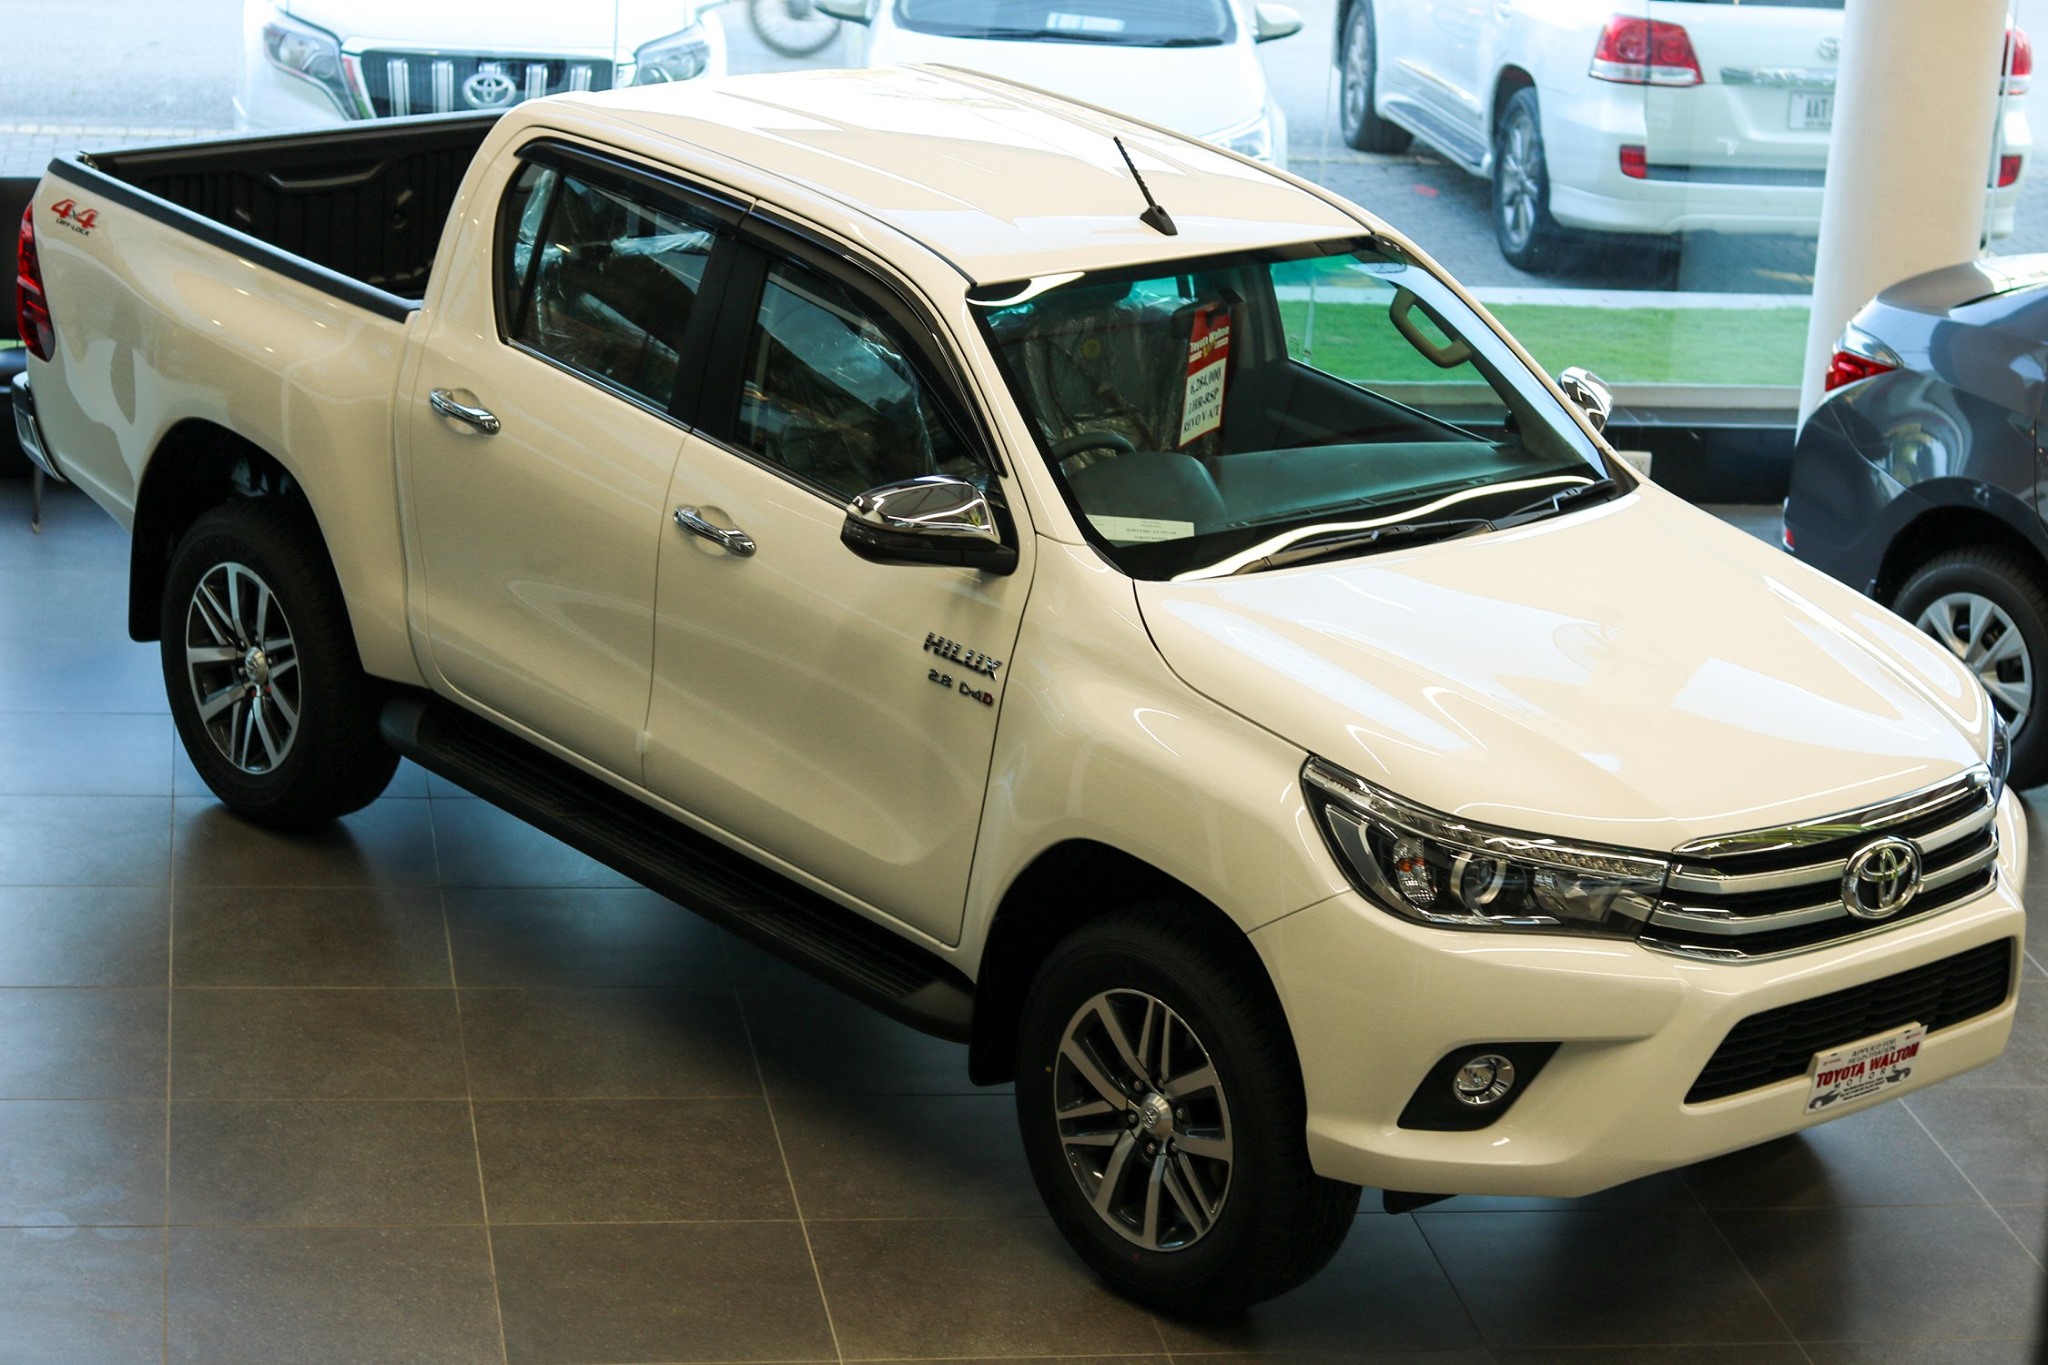 Toyota Hilux Wins Back 96.1% Share of the Market 2